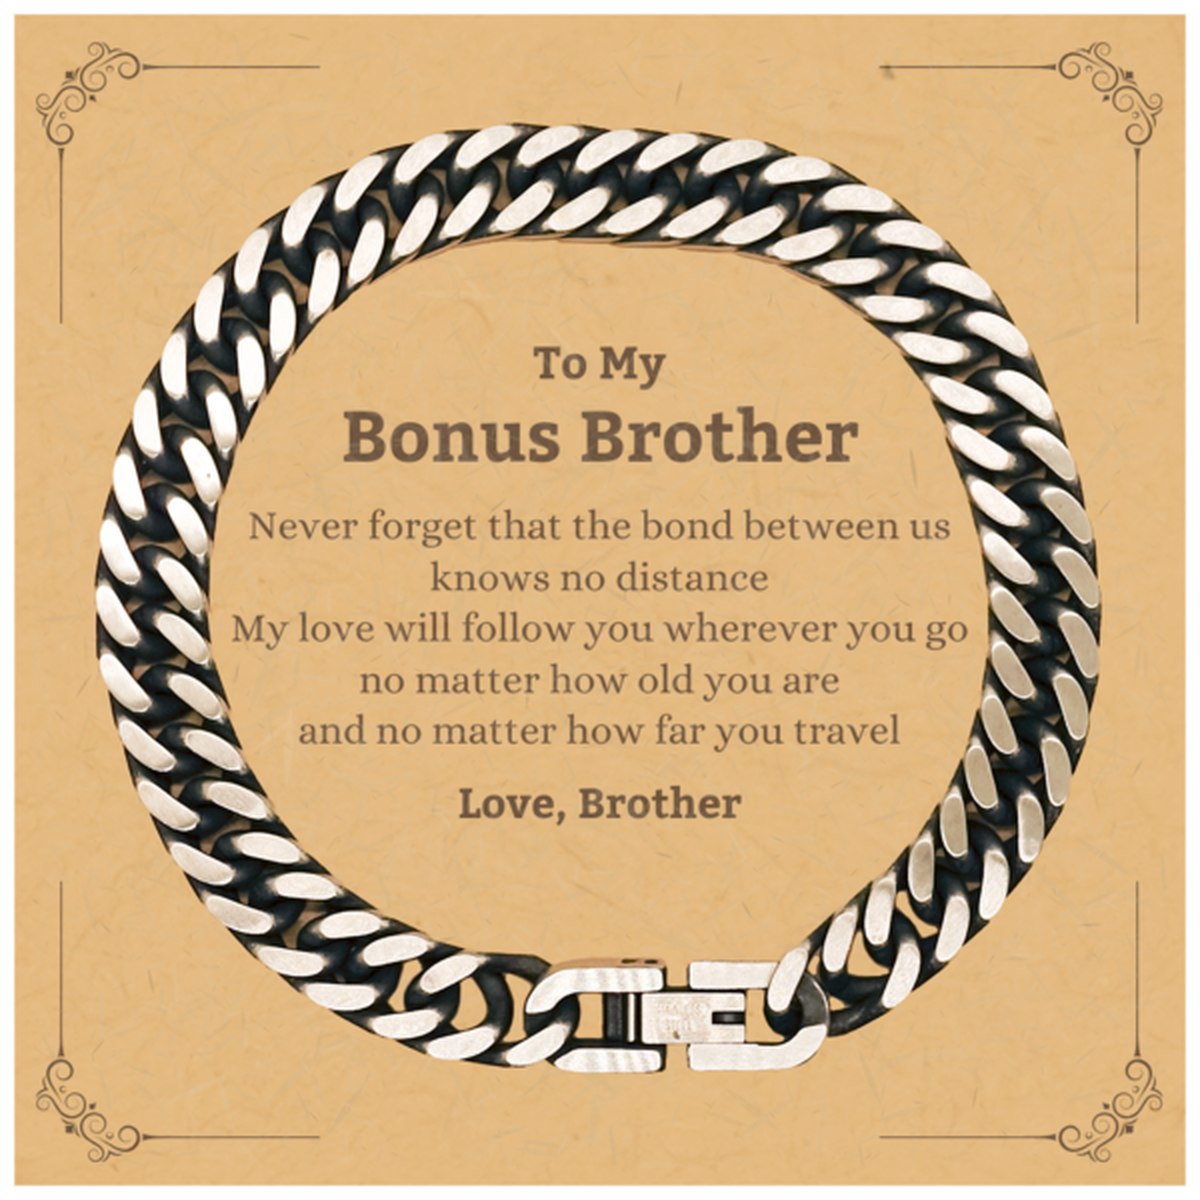 Bonus Brother Birthday Gifts from Brother, Adjustable Cuban Link Chain Bracelet for Bonus Brother Christmas Graduation Unique Gifts Bonus Brother Never forget that the bond between us knows no distance. Love, Brother